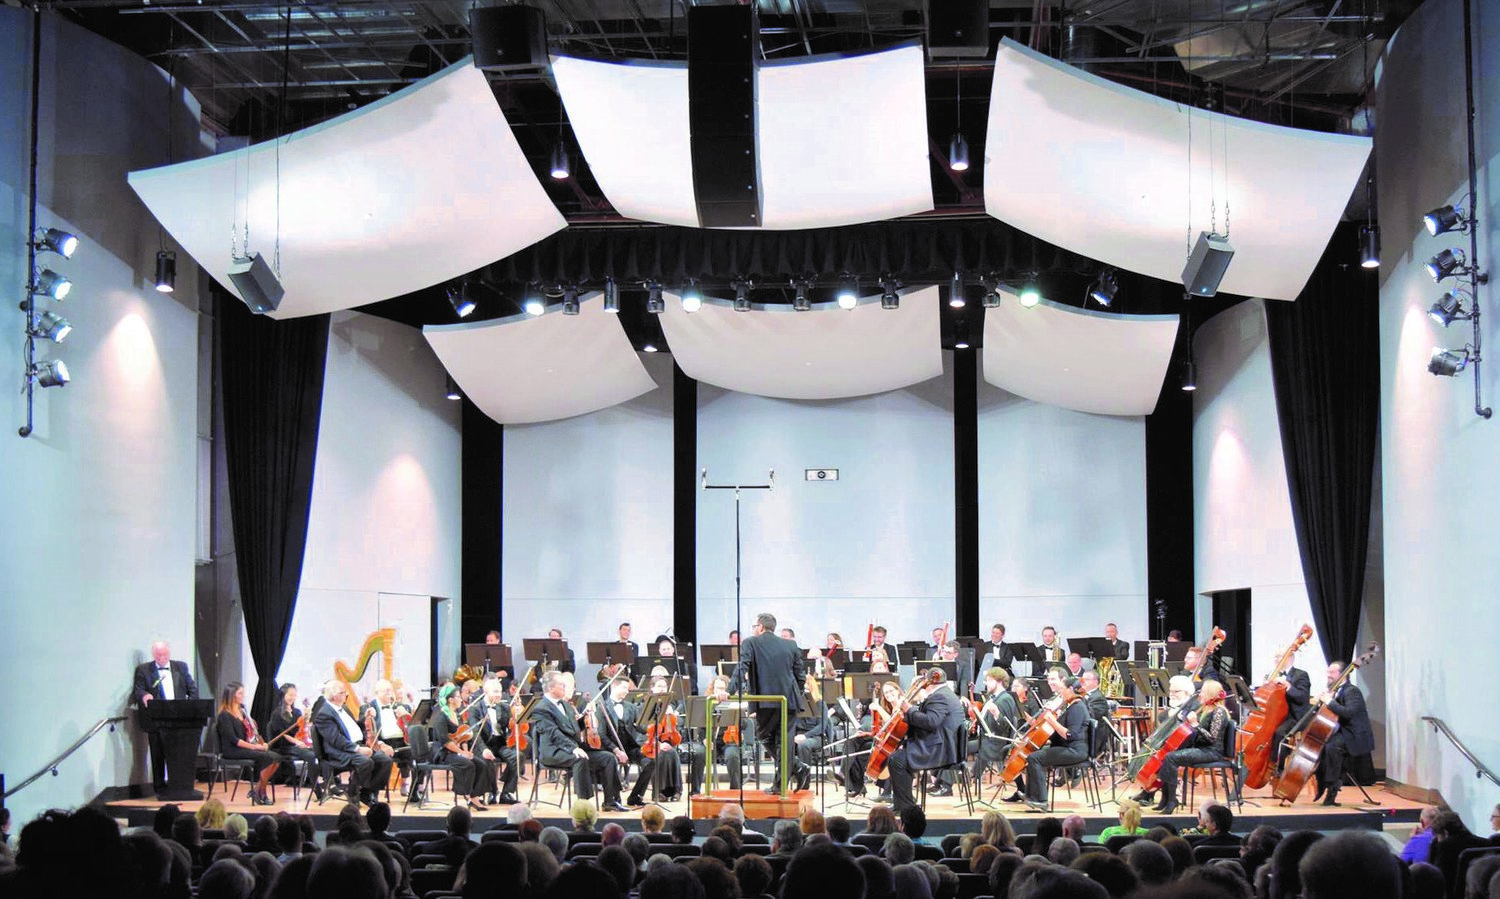 The Ocala Symphony Orchestra will perform on Feb. 4.